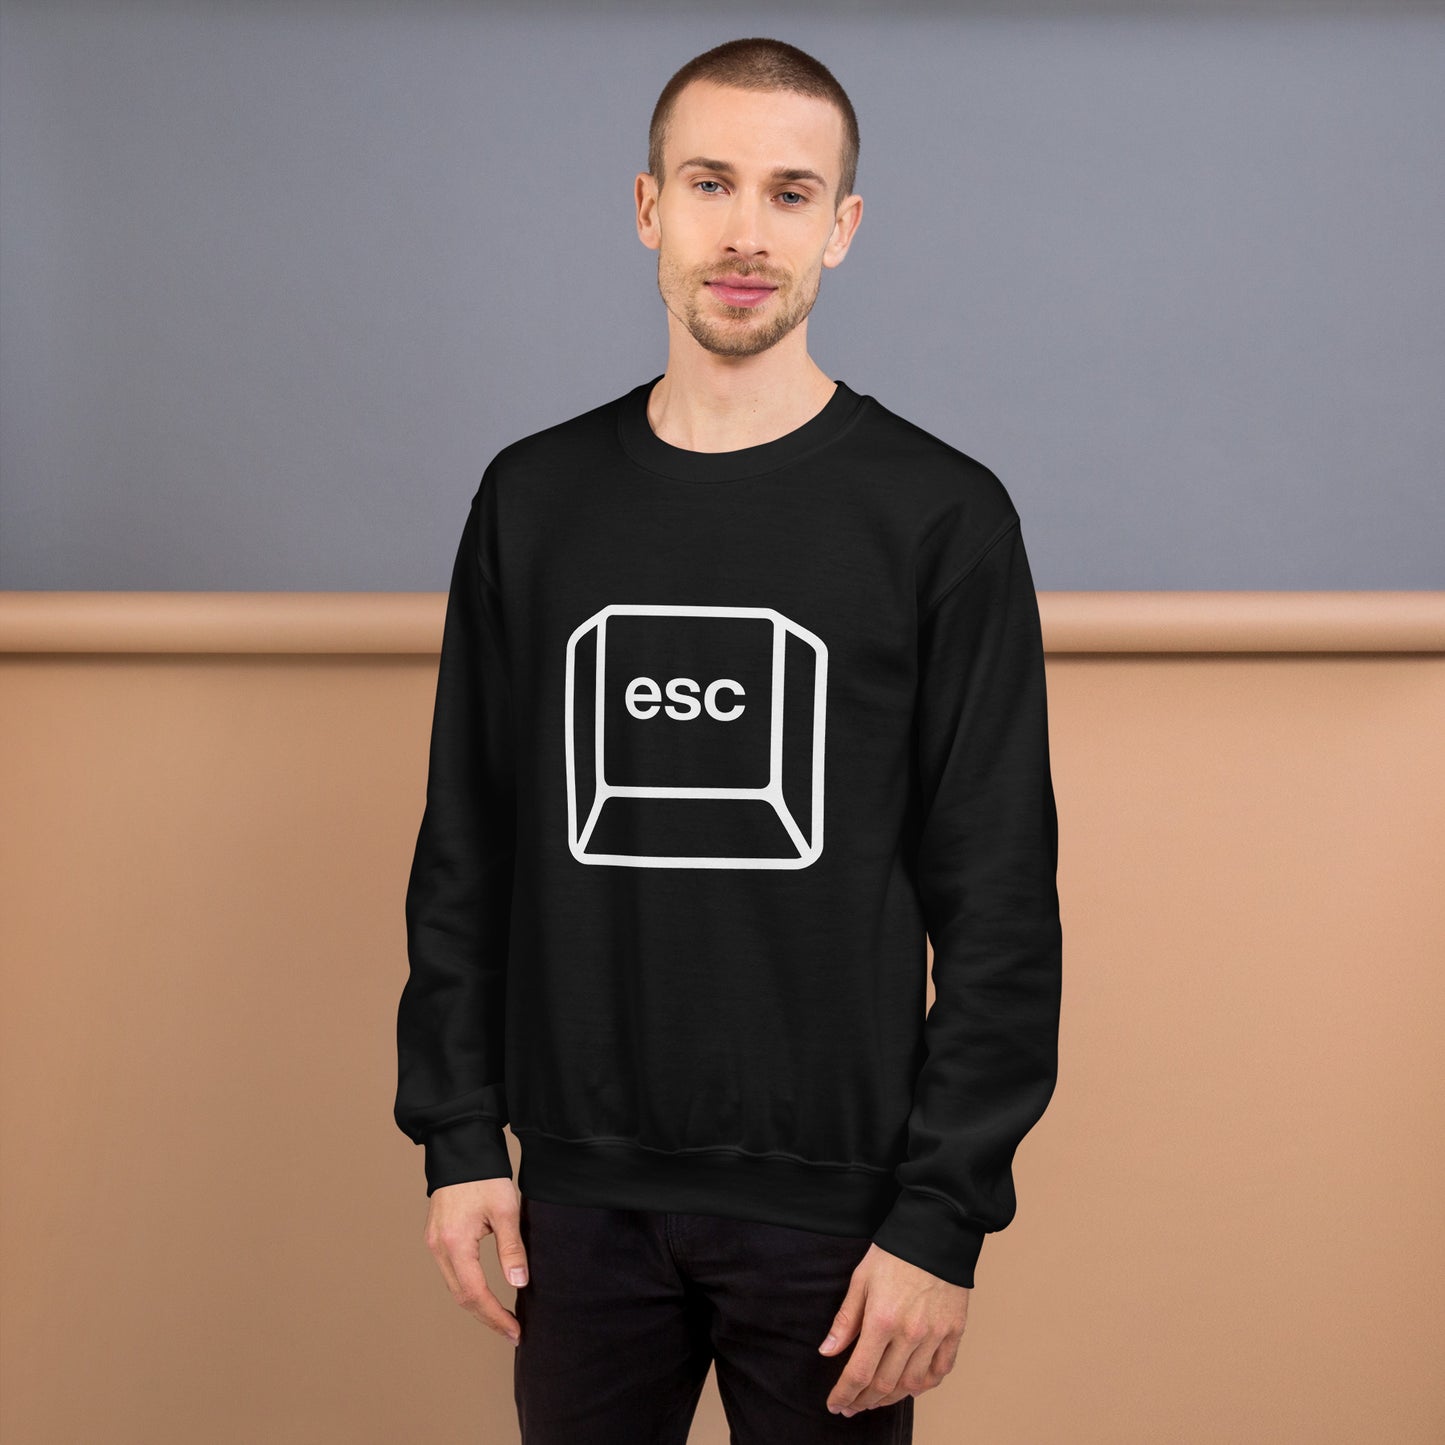 Man with black sweatshirt with picture of esc key